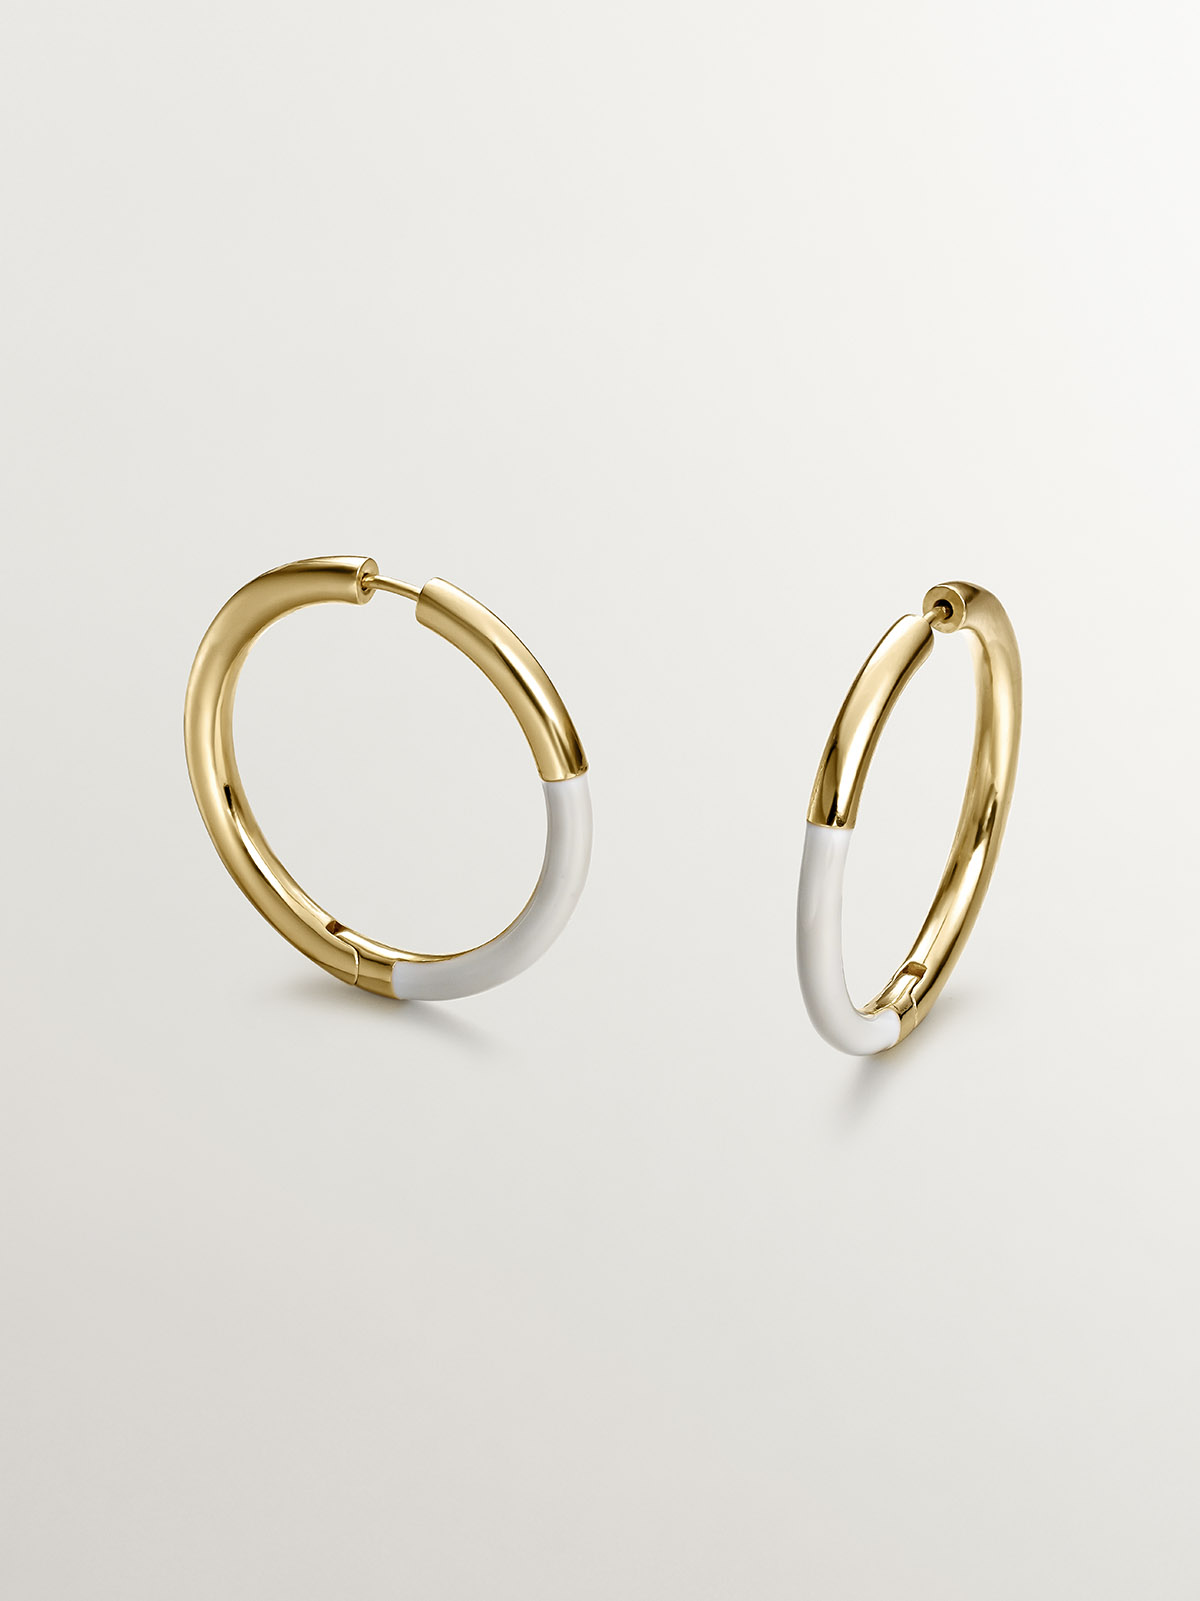 Large hoop earrings made of 925 silver coated in 18K yellow gold with white enamel.